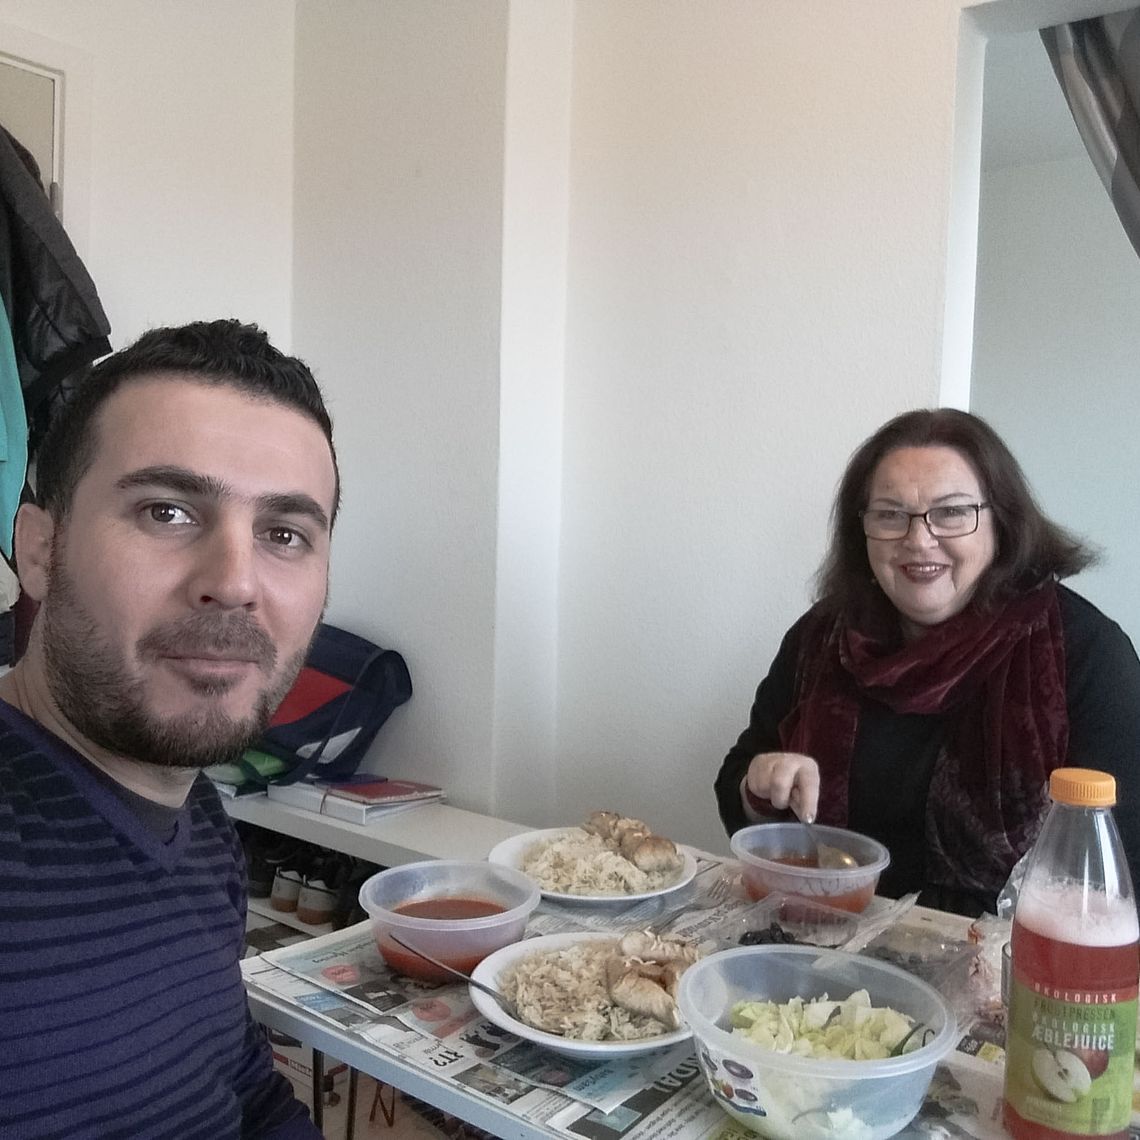 Abdulsalam and a woman sitting at a table filled with dishes and juice and coca cola